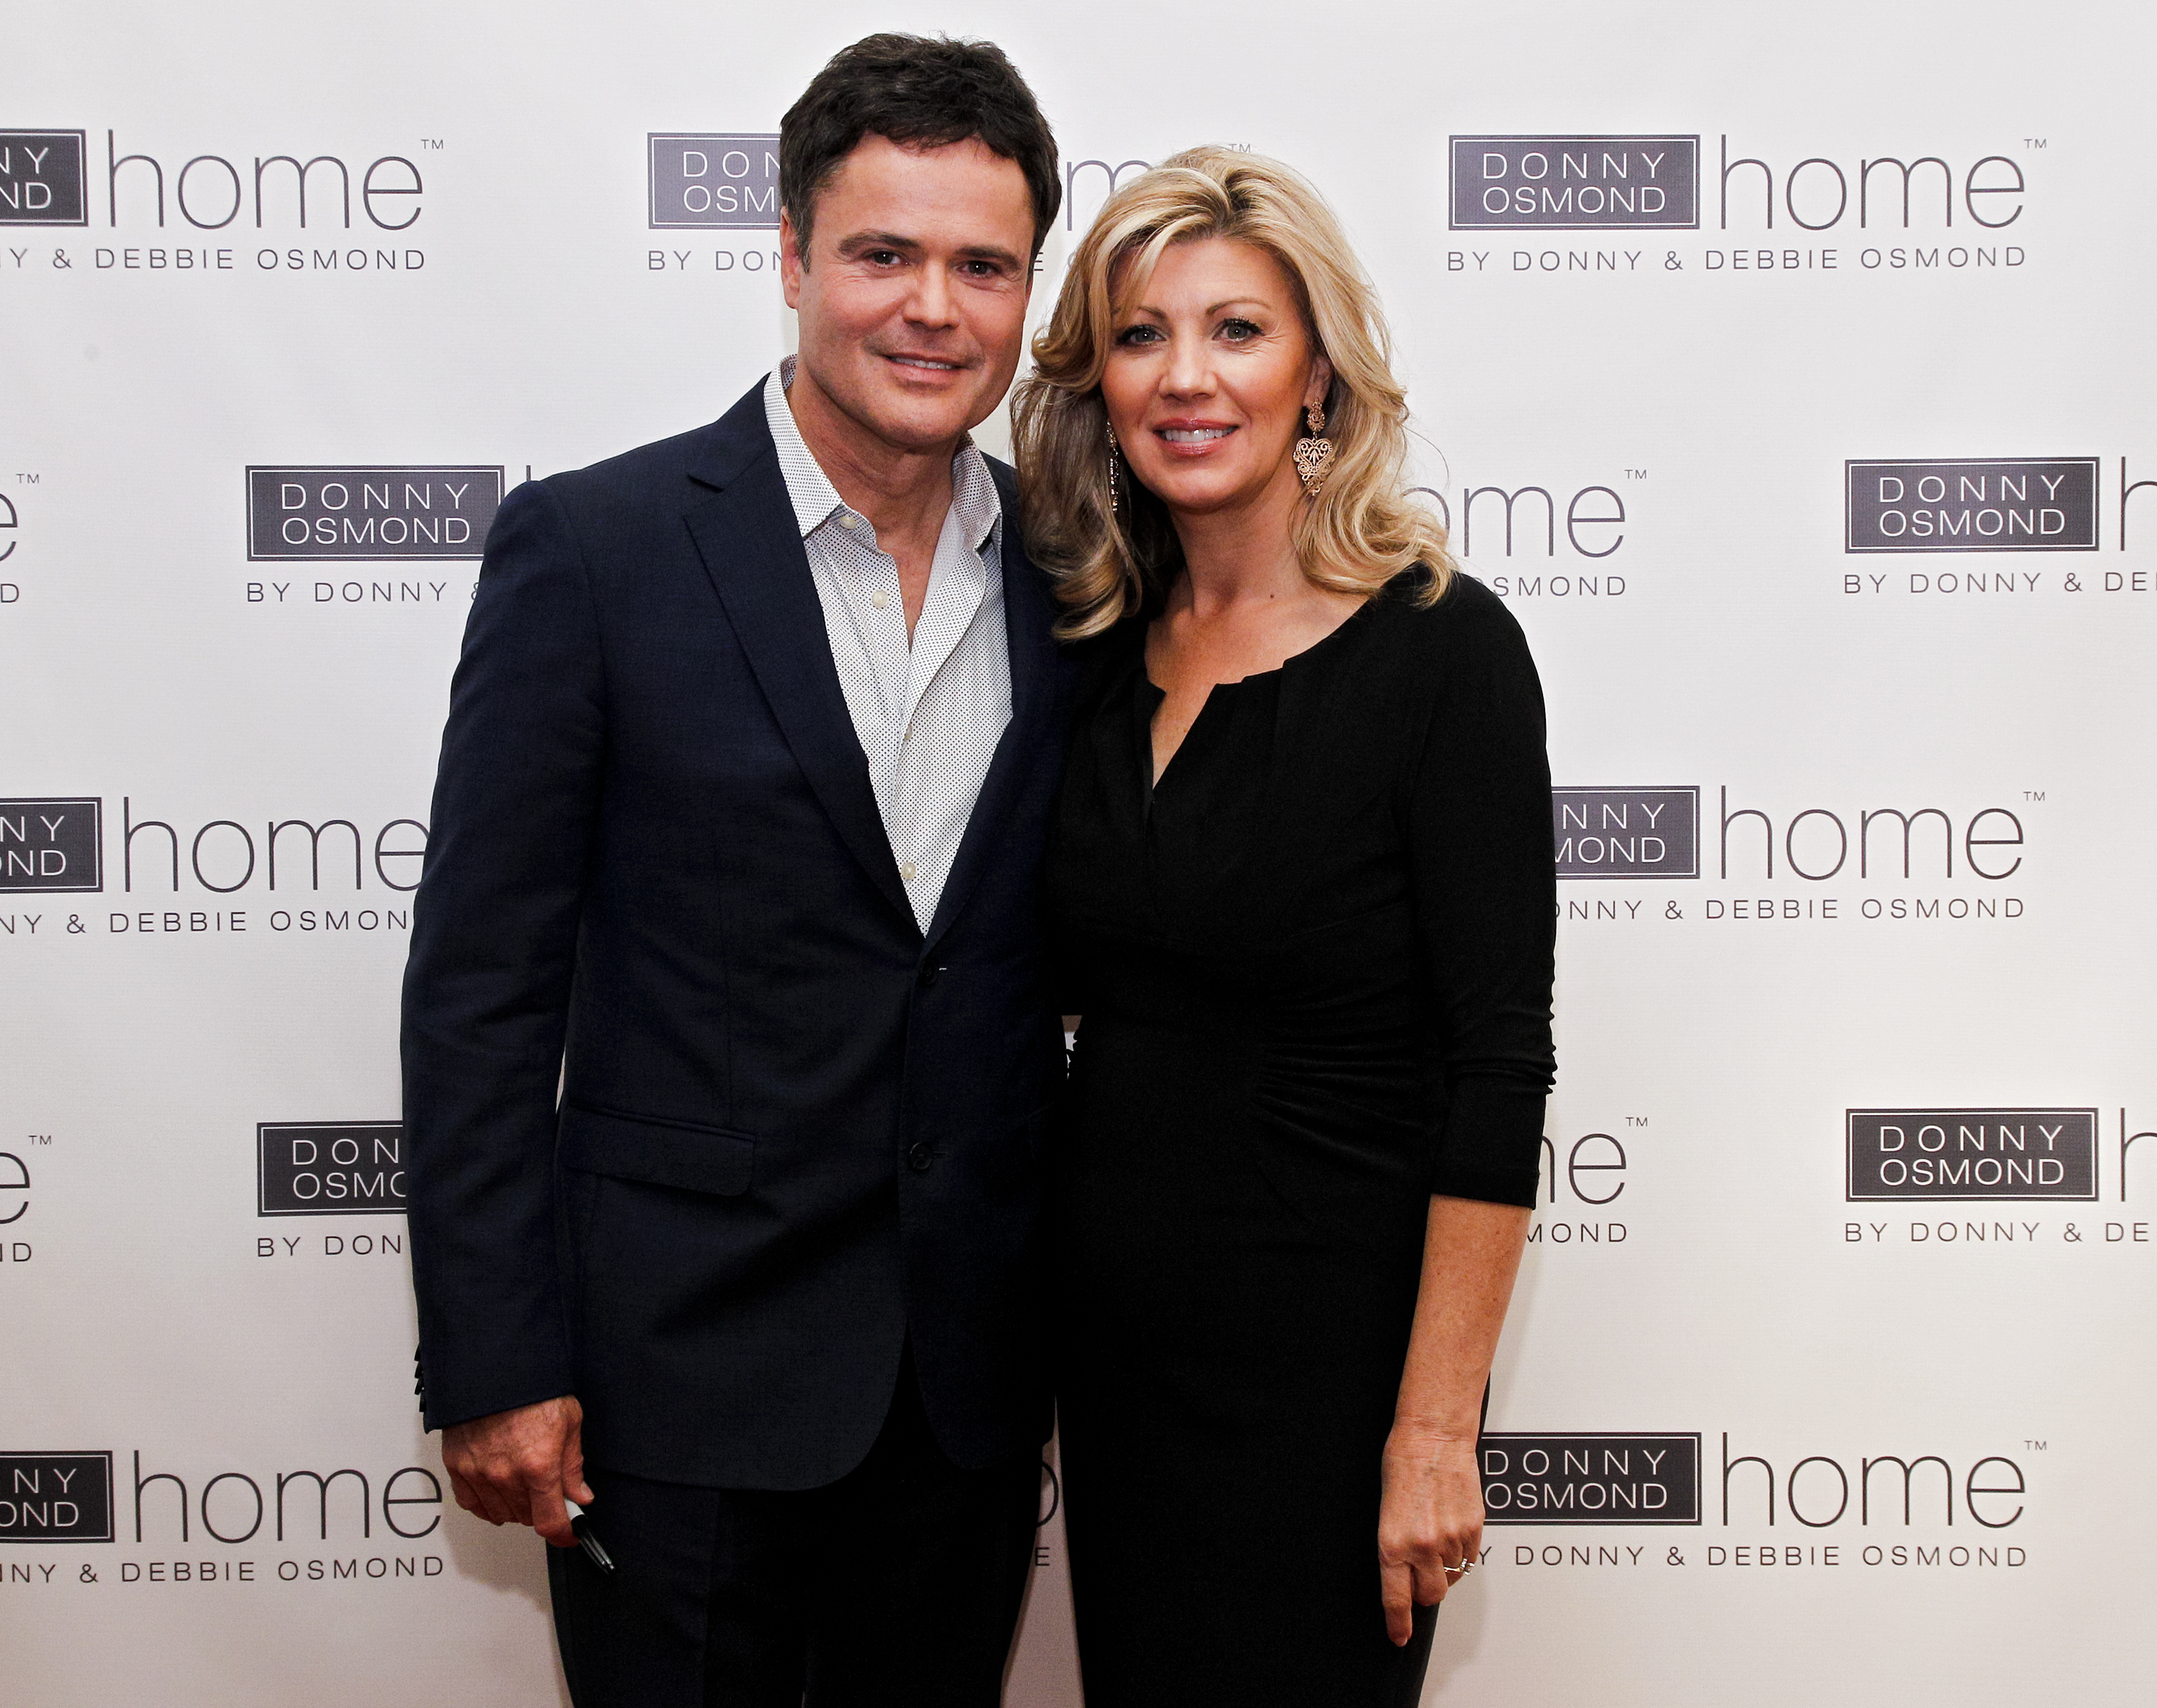 Donny Osmond and Debbie Osmond attend the launch of Donny Osmond Home on September 23, 2013, in New York City | Source: Getty Images